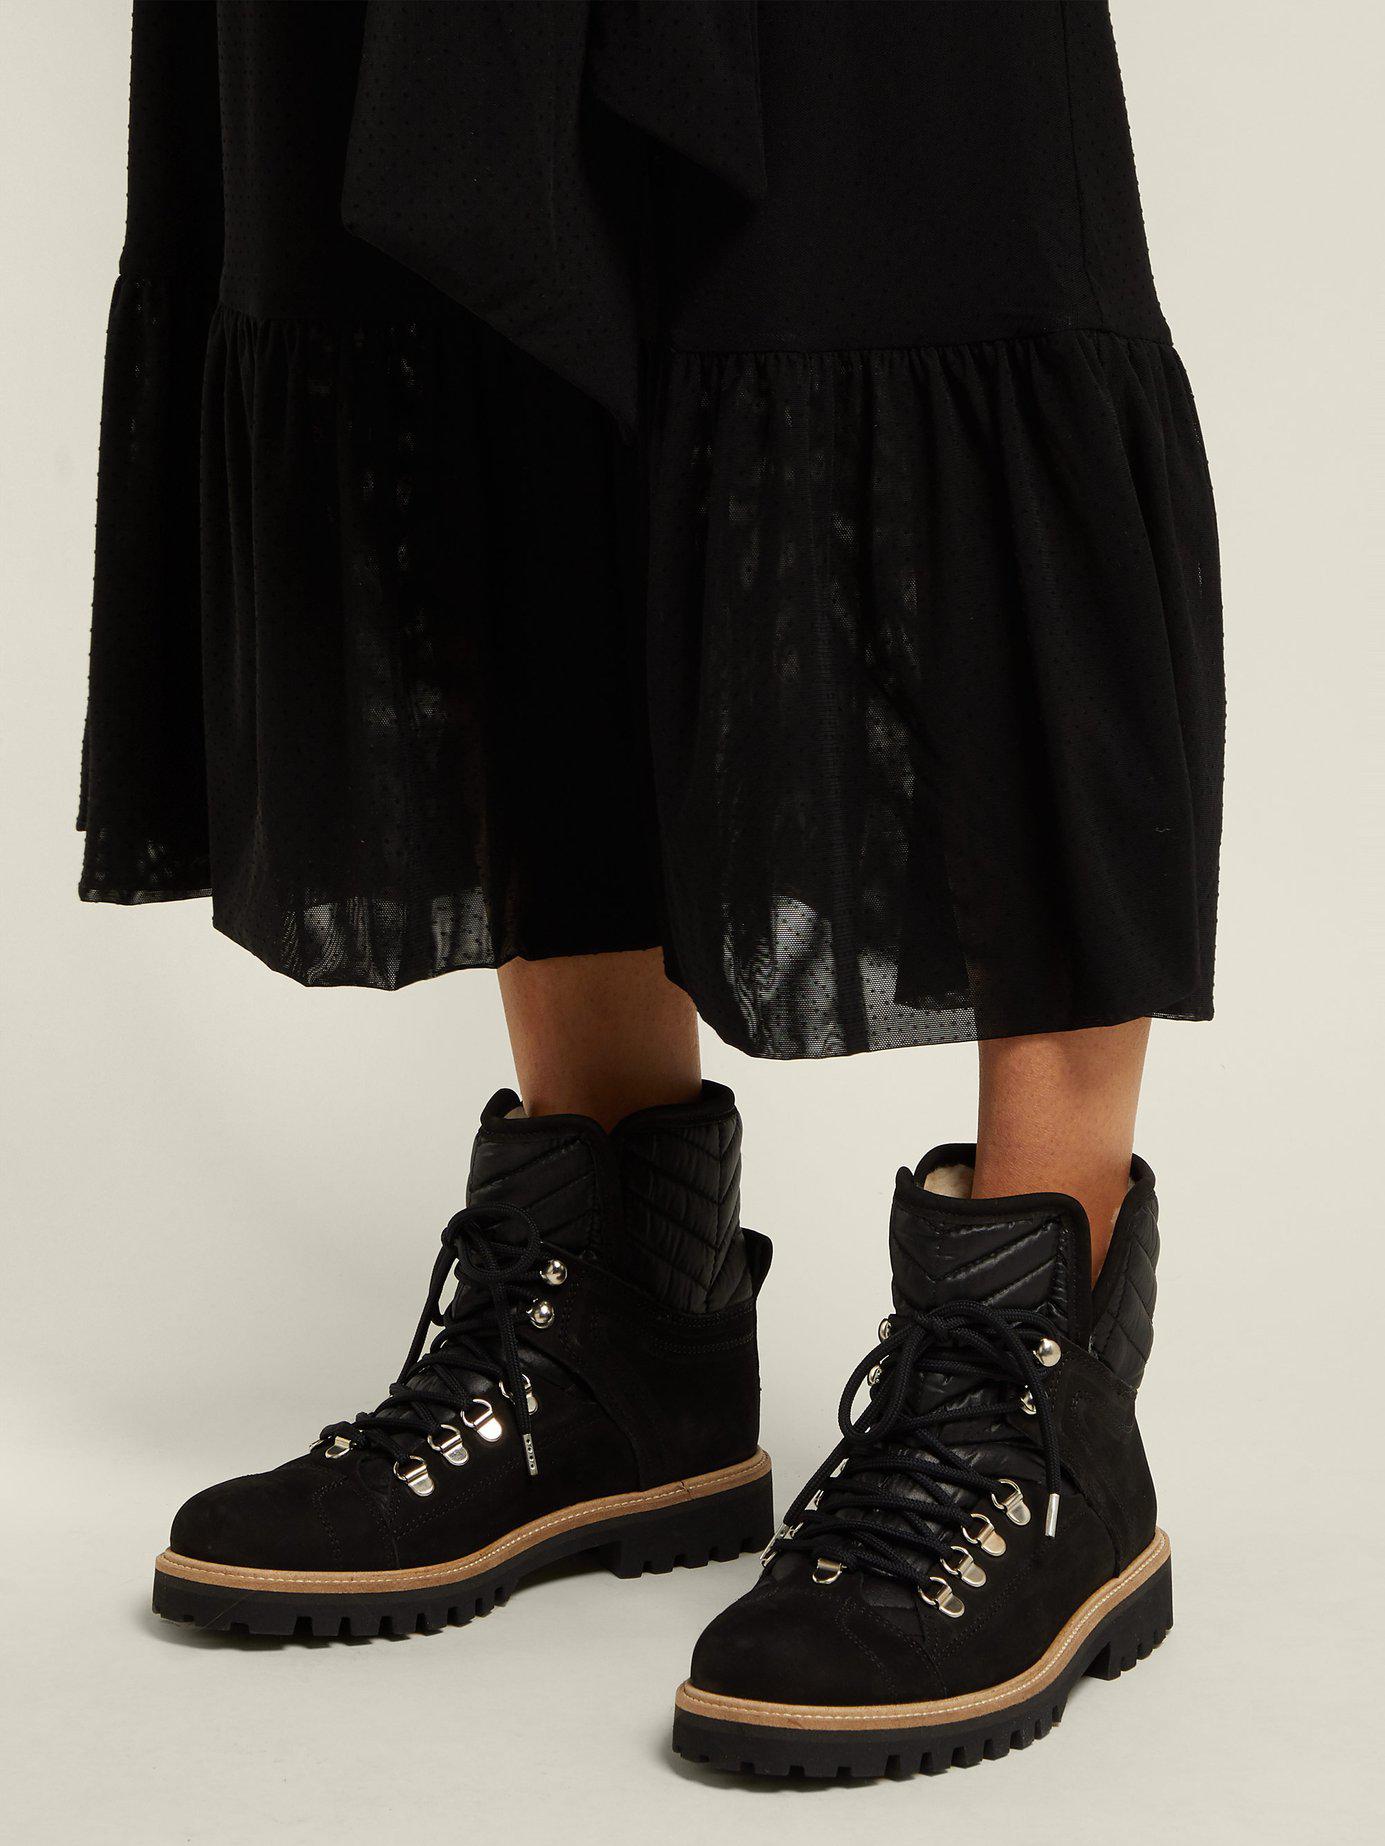 Ganni Leather Quilted Lace Up Boots in Black - Save 60% - Lyst